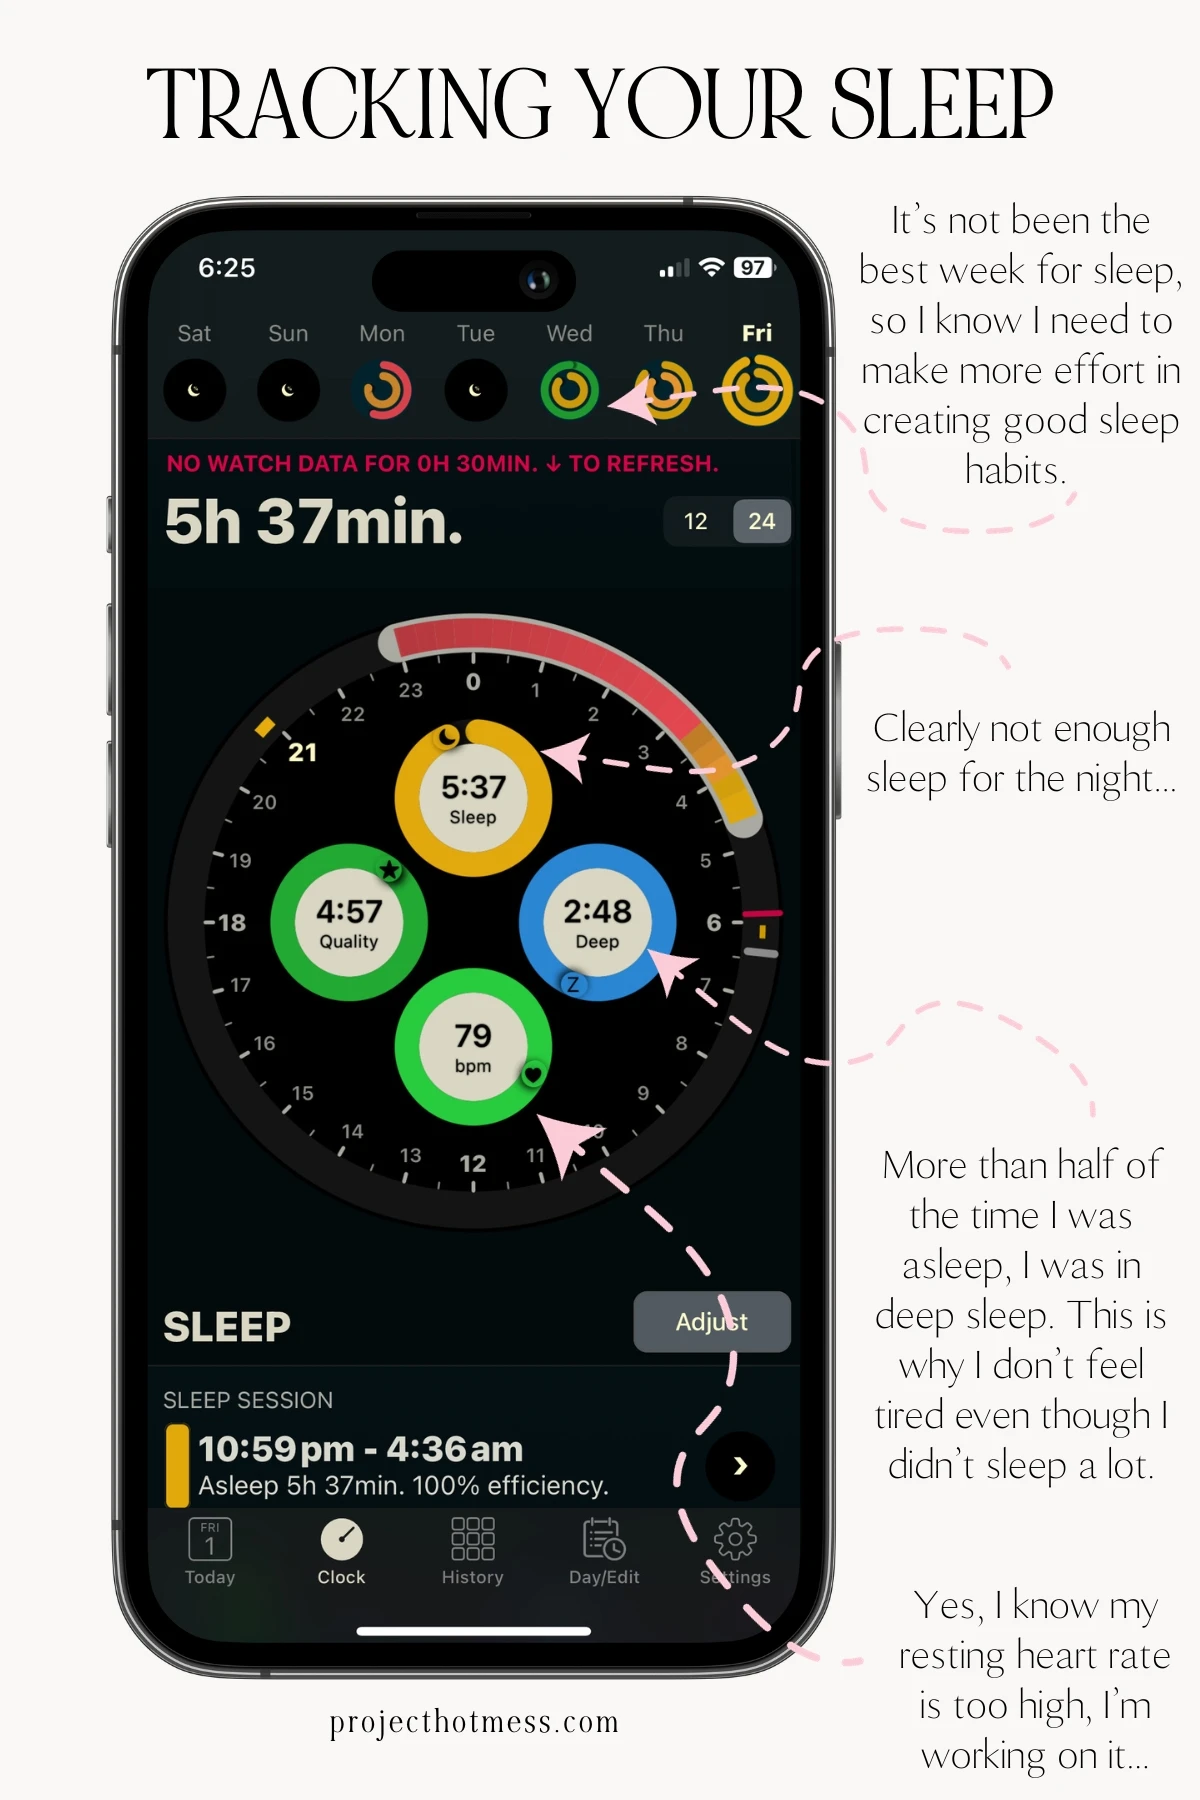 Tracking your sleep is just one of the ways you can create new habits before the end of the year.